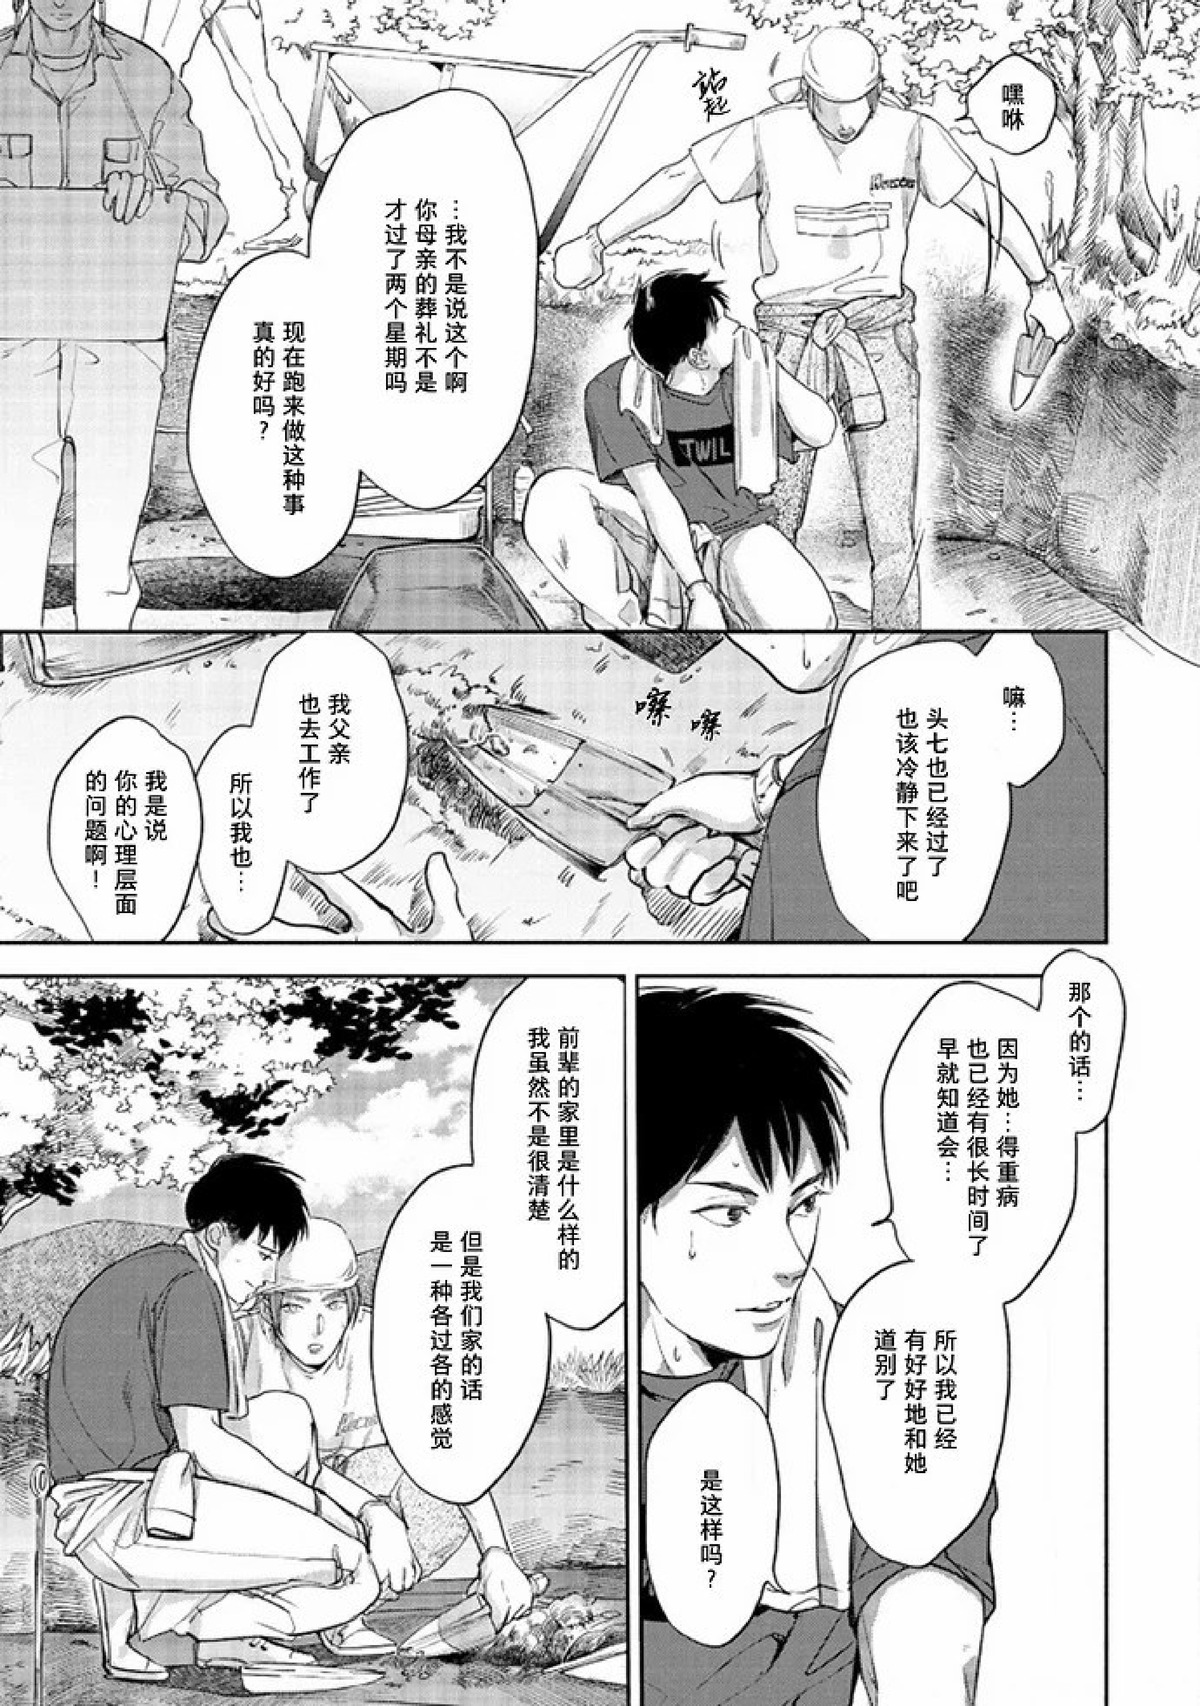 【Two sides of the same coin[腐漫]】漫画-（上卷01-02）章节漫画下拉式图片-17.jpg